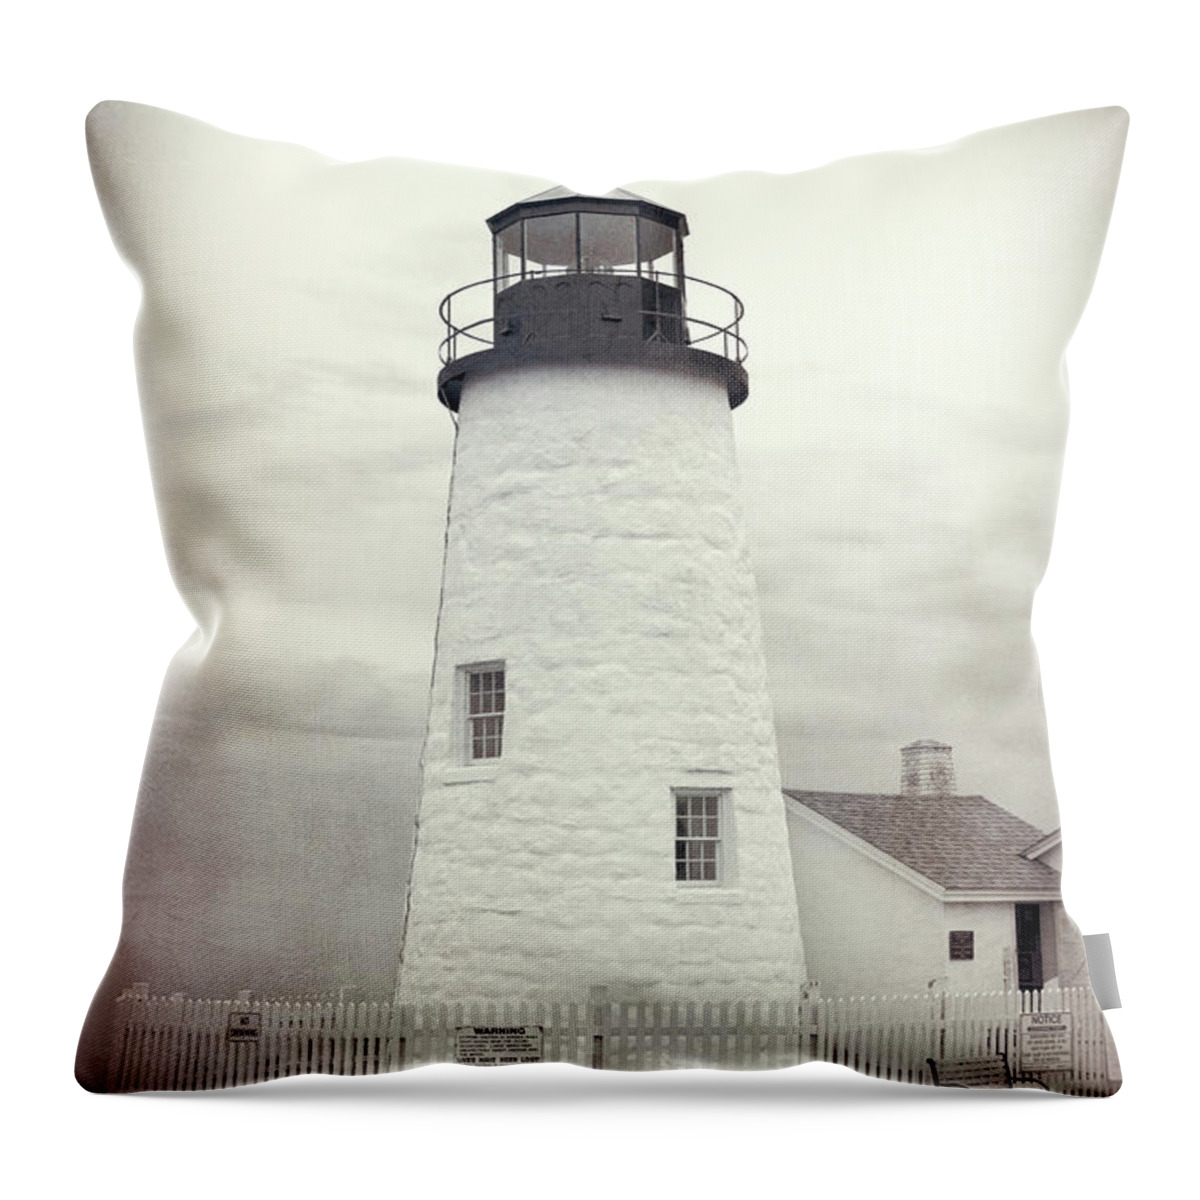 Vintage Pemaquid Point Lighthouse Textured Throw Pillow featuring the photograph Vintage Pemaquid Point Lighthouse Textured by Dan Sproul